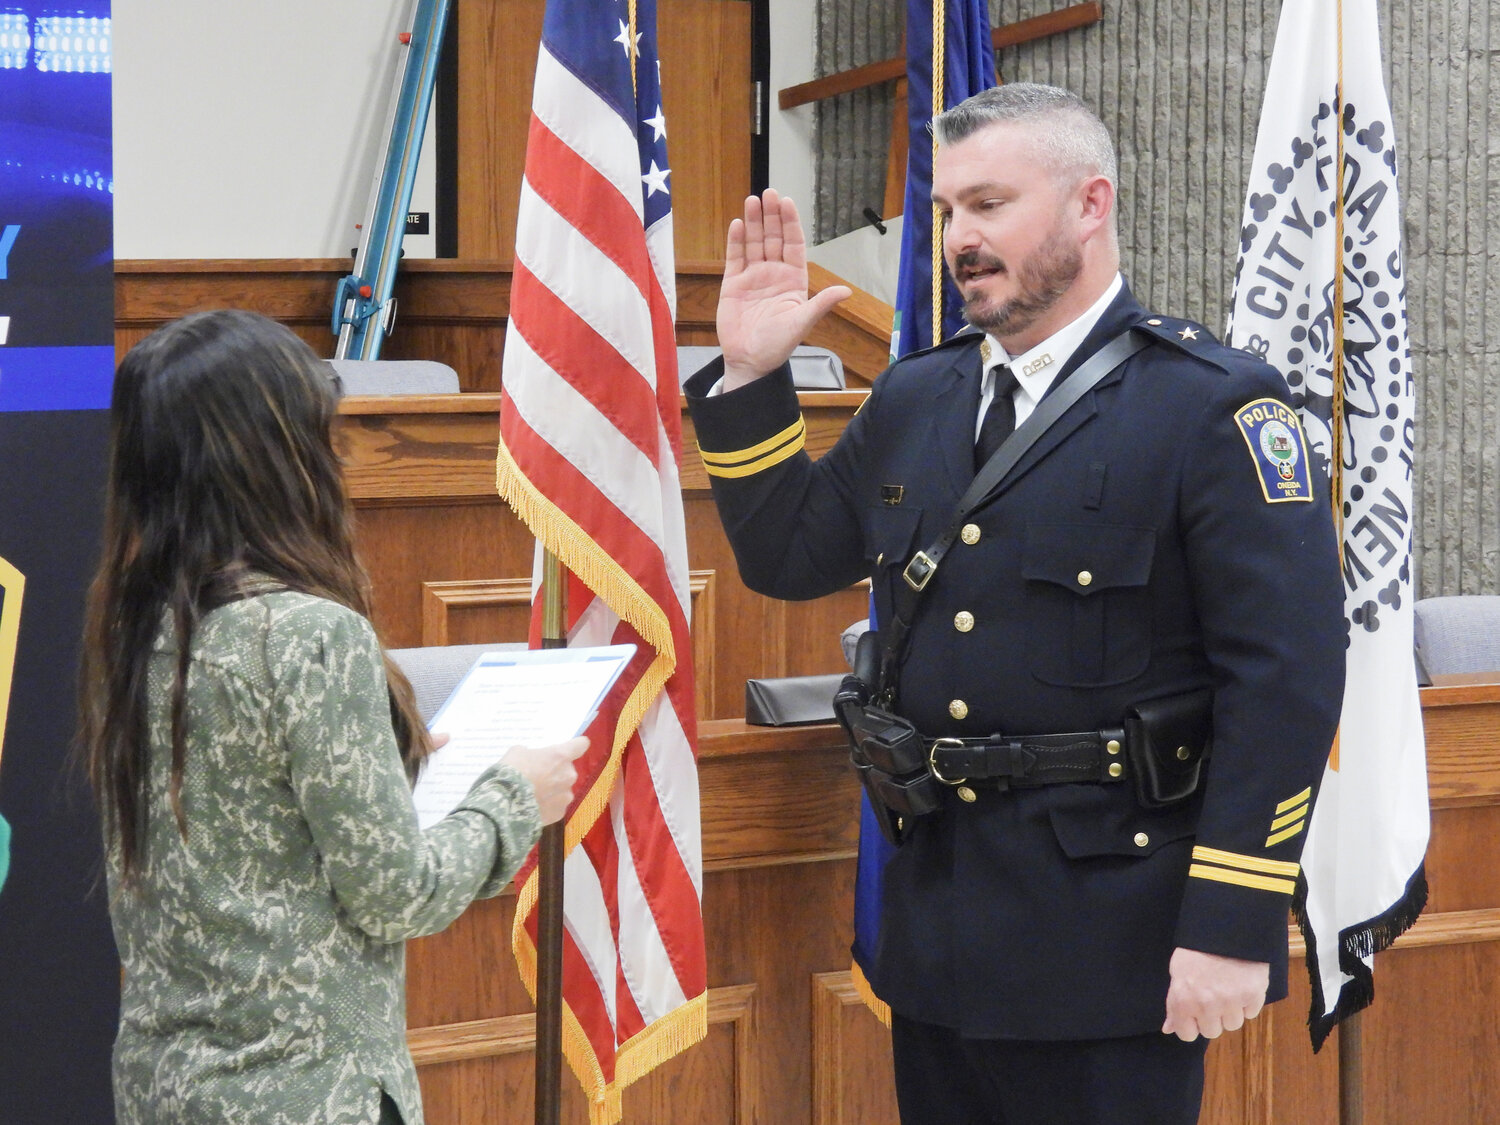 Assistant Chief Matthew Colella takes takes his oath at a swearing-in ceremony in the Oneida Common Council on Thursday, March 9. Colella transferred from the Little Falls Police Department in 2005 back to his hometown of Oneida and in 2021, he assumed the role of administrative lieutenant.